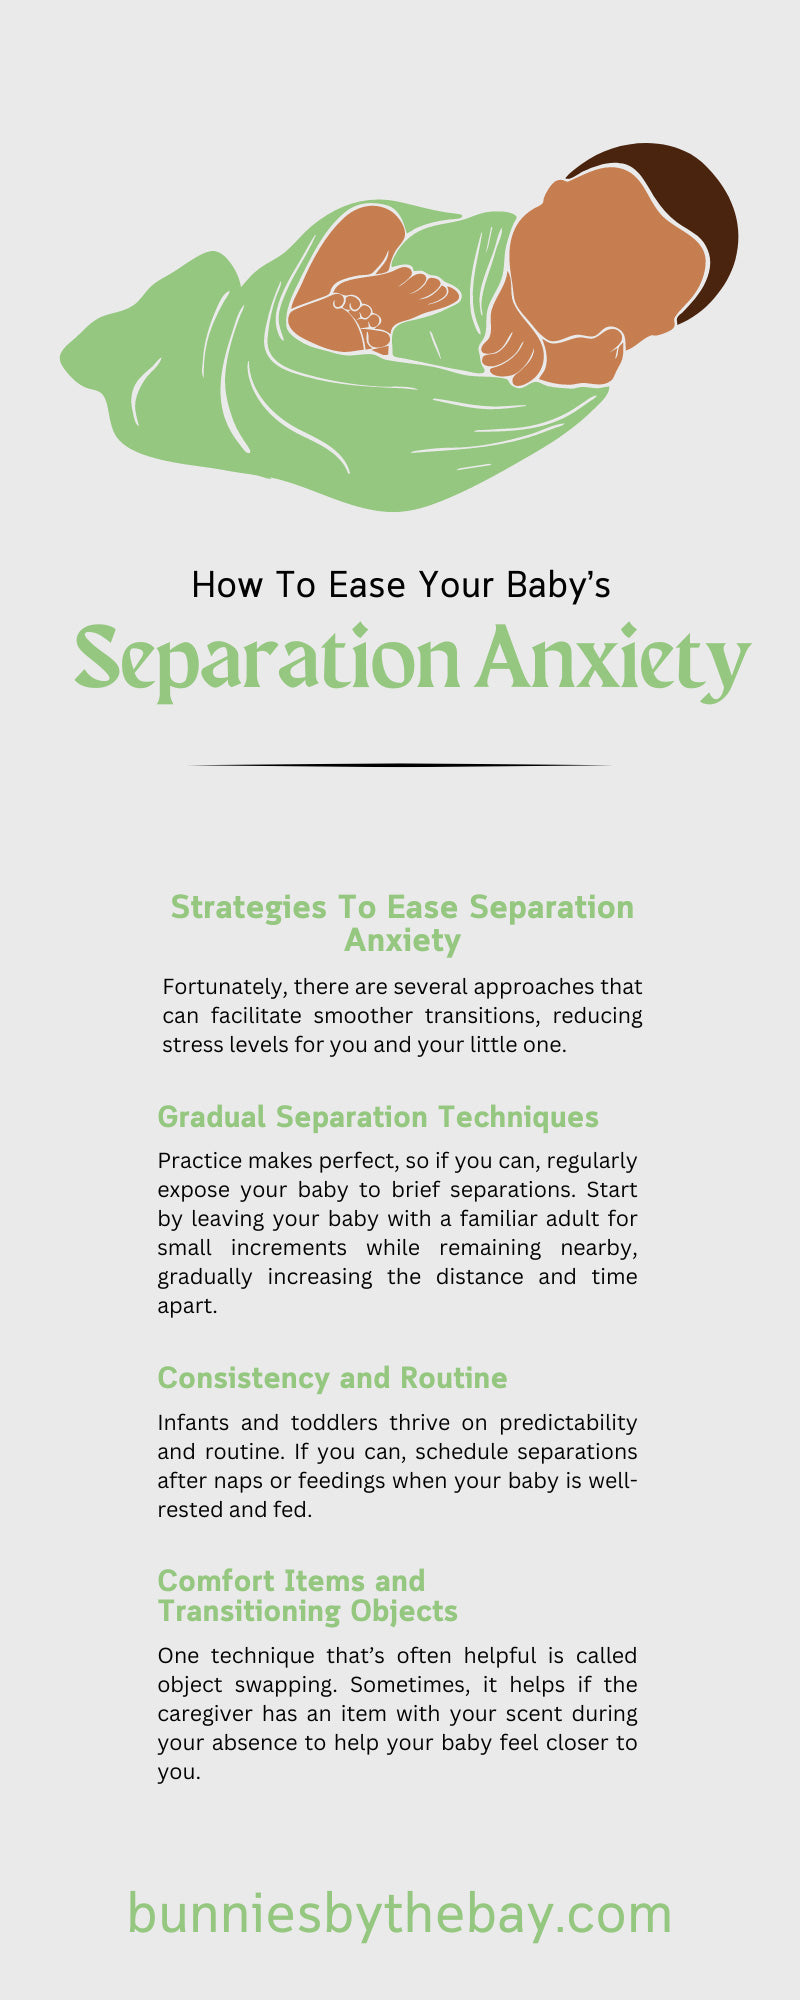 How To Ease Your Baby’s Separation Anxiety